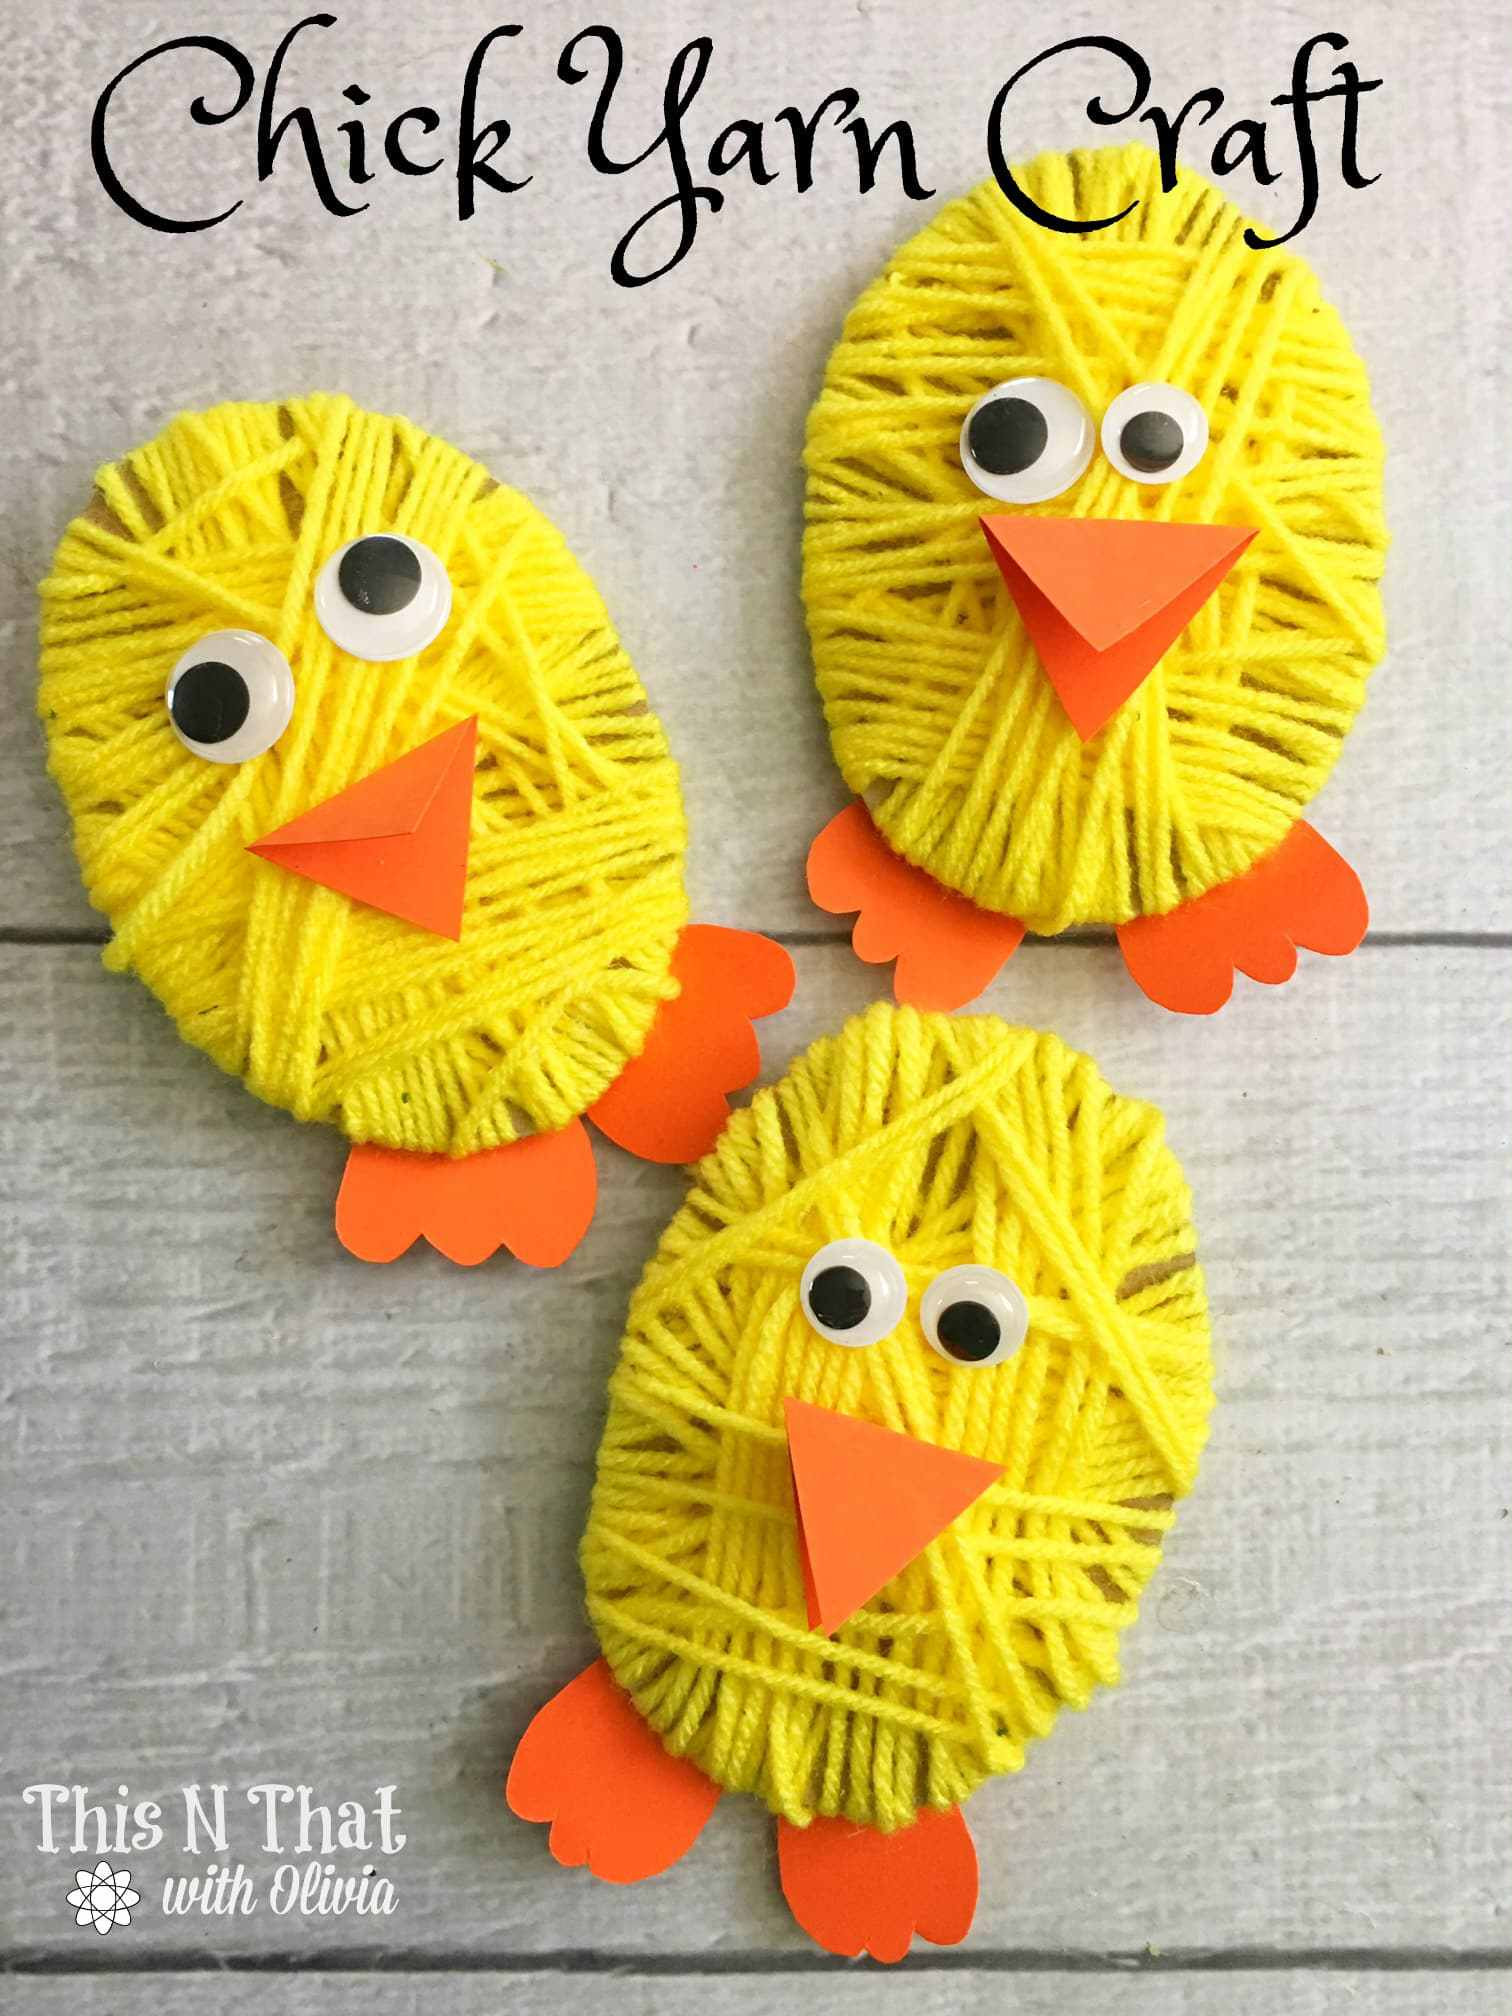 Craft Ideas For Preschoolers
 Over 33 Easter Craft Ideas for Kids to Make Simple Cute